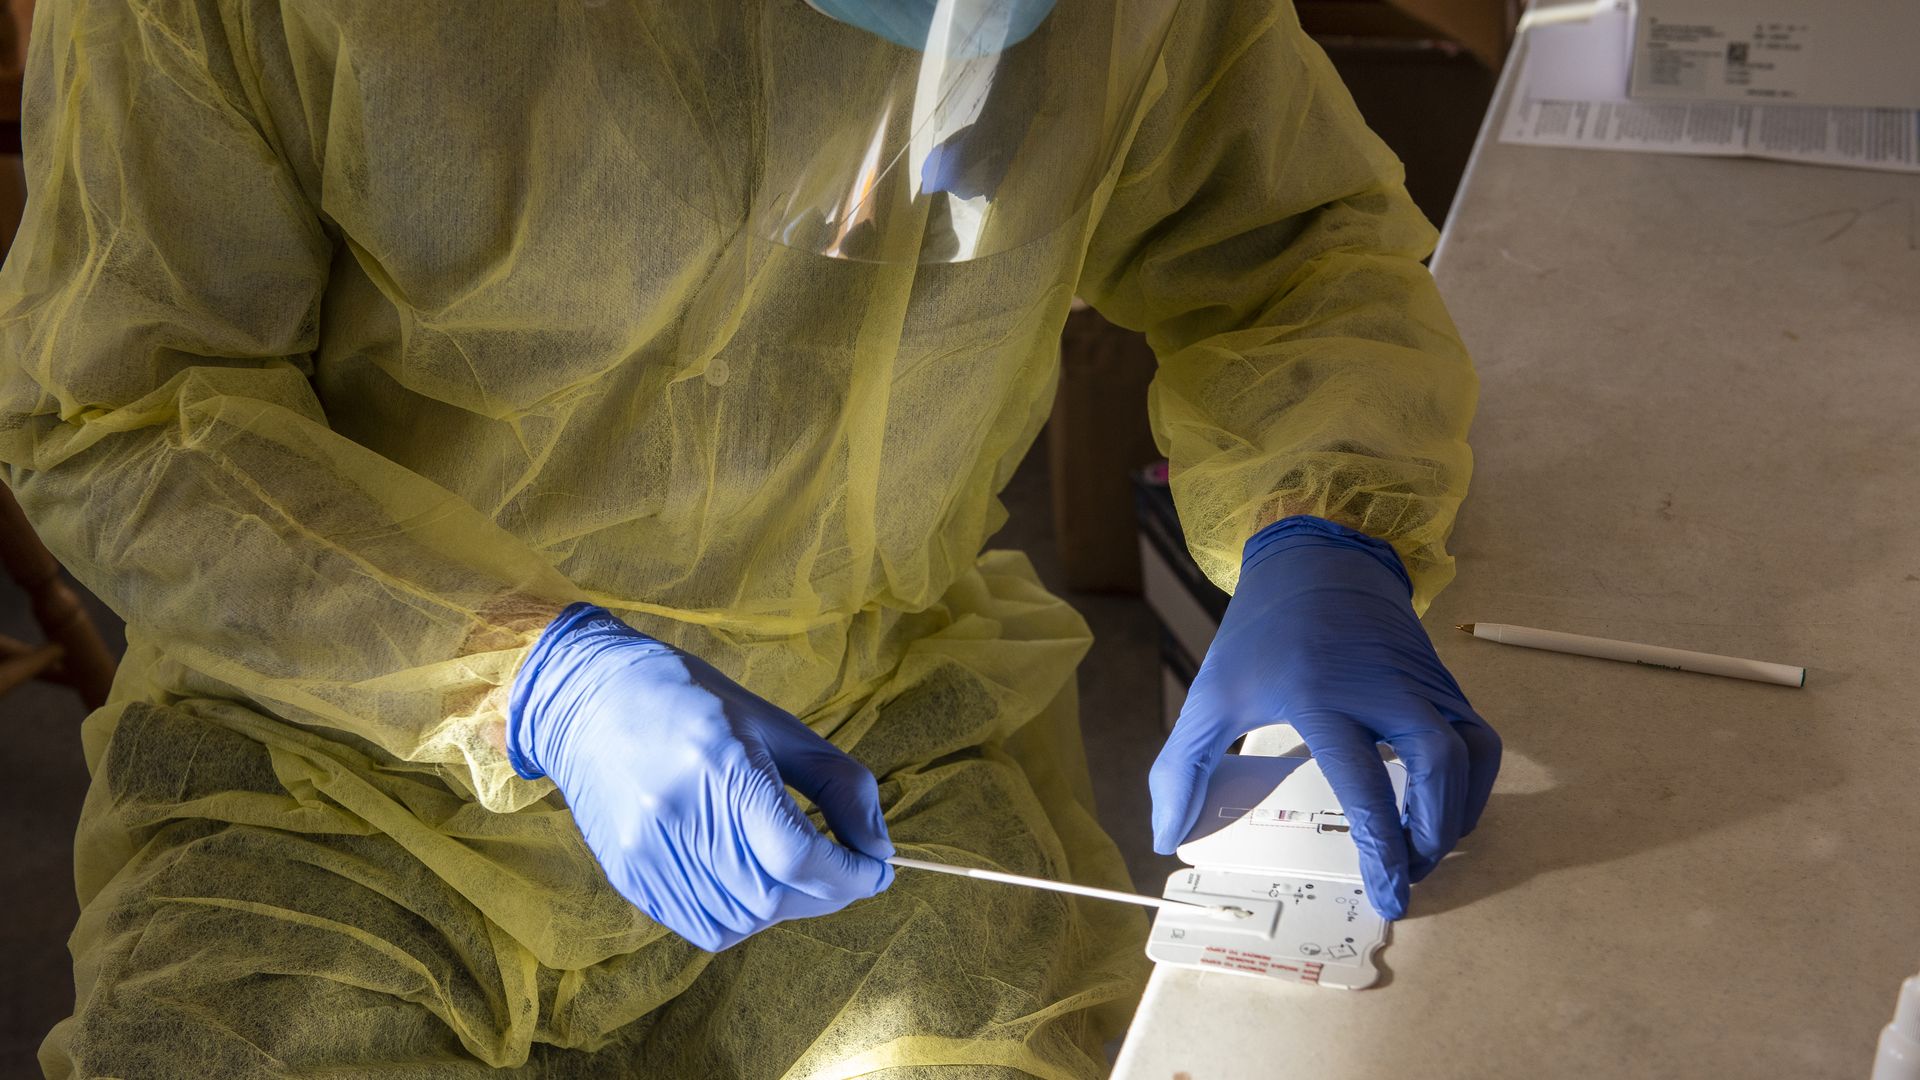 A health care worker wearing gloves and PPE places a swab in a COVID-test that rests on the edge of a table